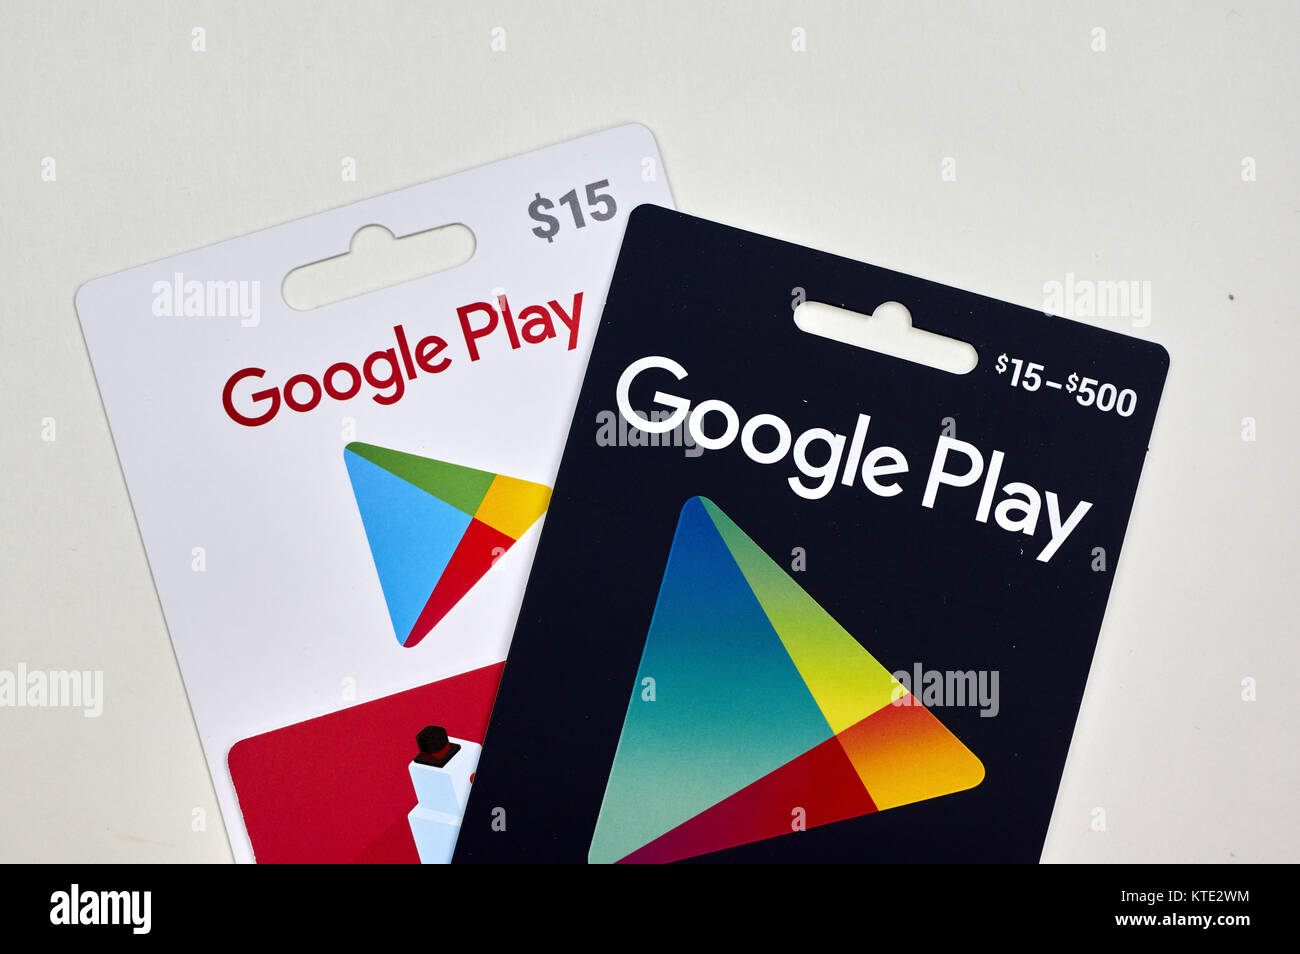 MONTREAL, CANADA - JULY 30, 2017 : Google play gift cards on a white background. Stock Photo